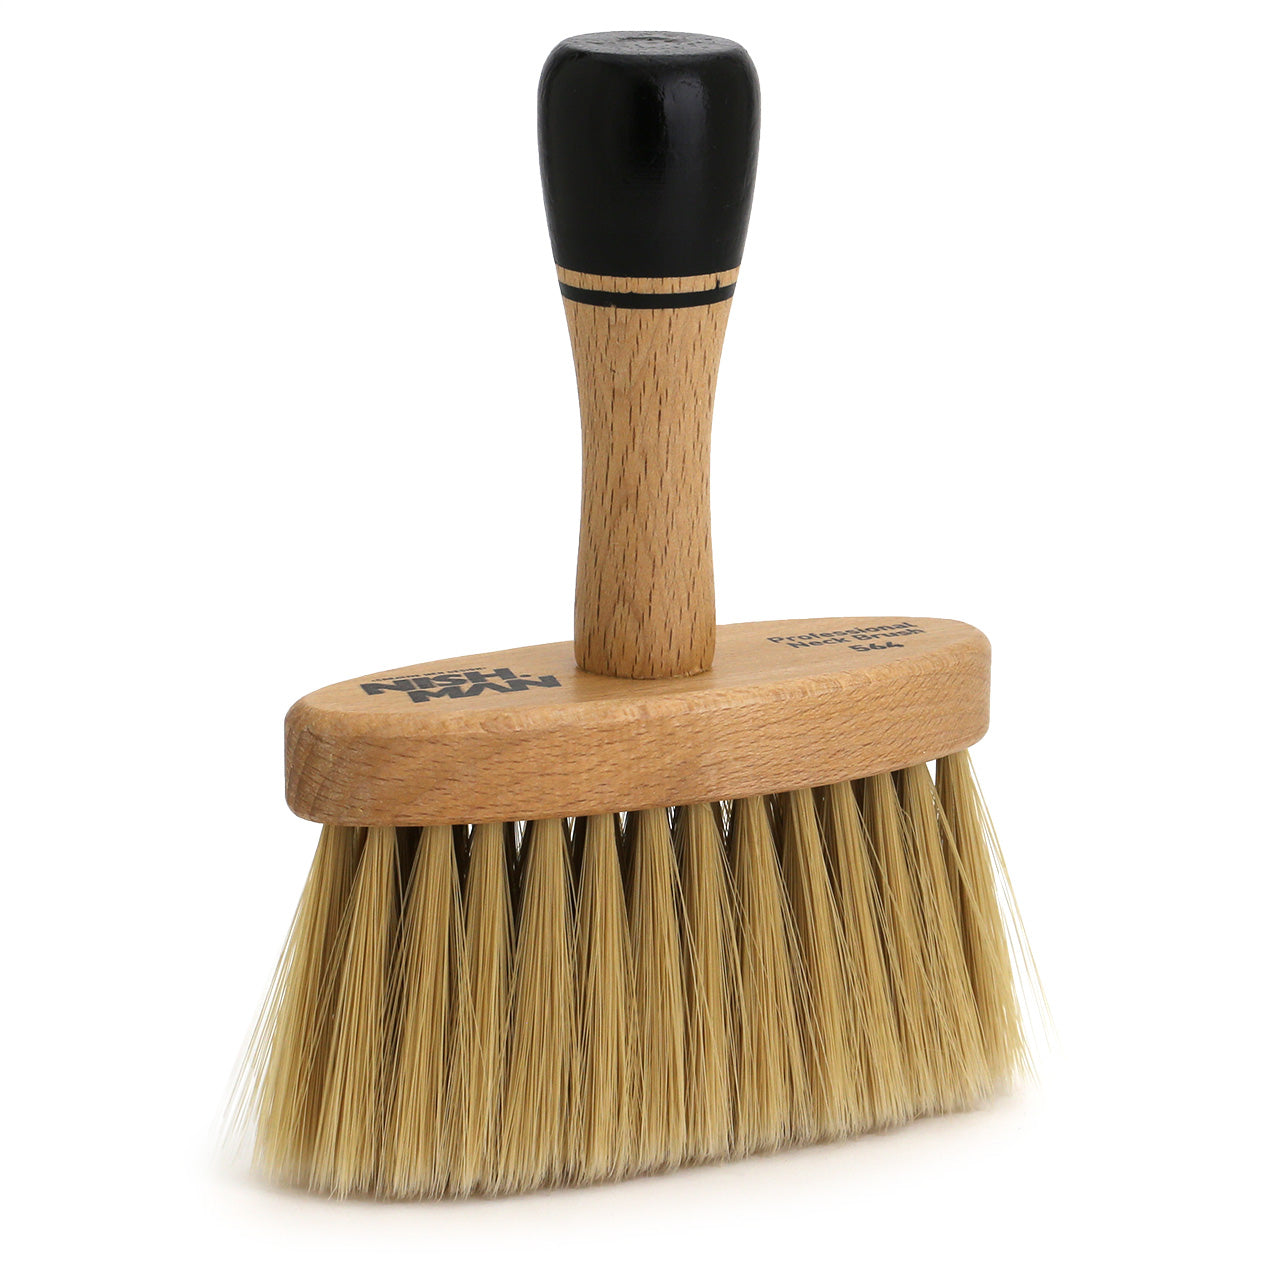 Nishman Neck Brush with wooden handle and cruelty-free synthetic bristles for a soft but firm cleaning action